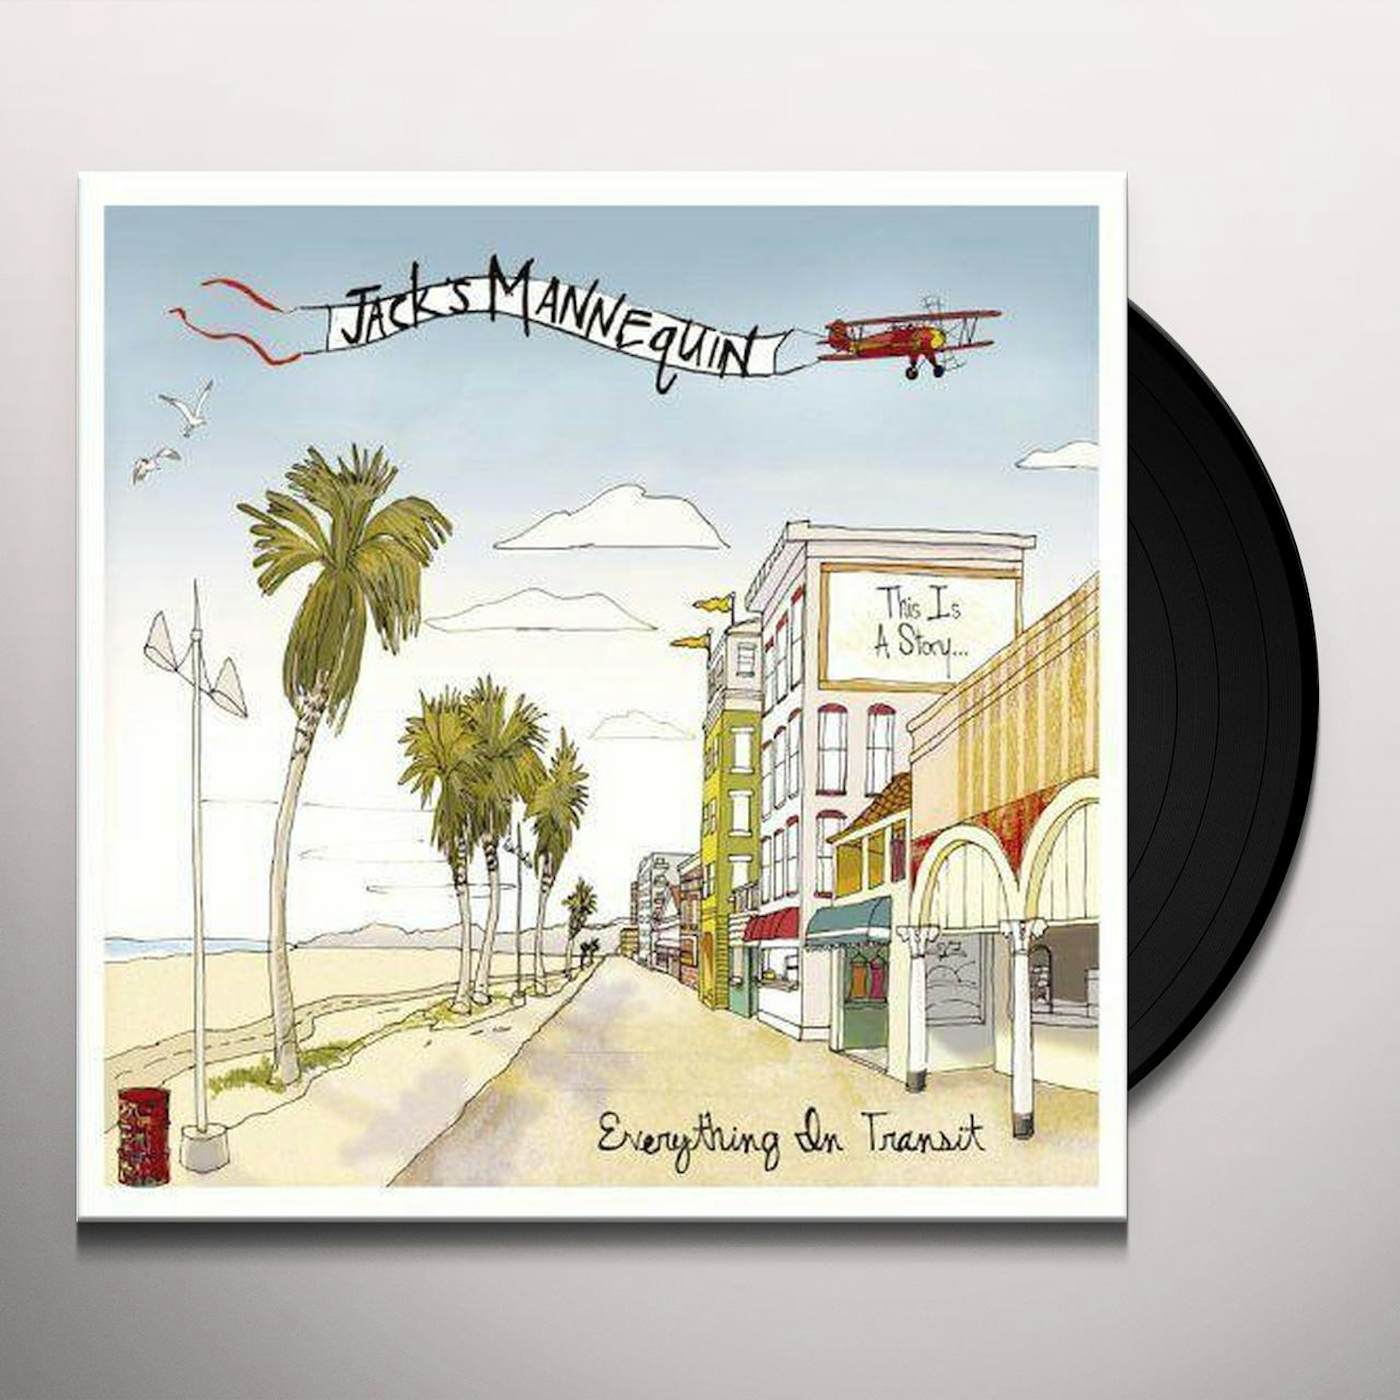 Jack's Mannequin Everything In Transit Vinyl Record